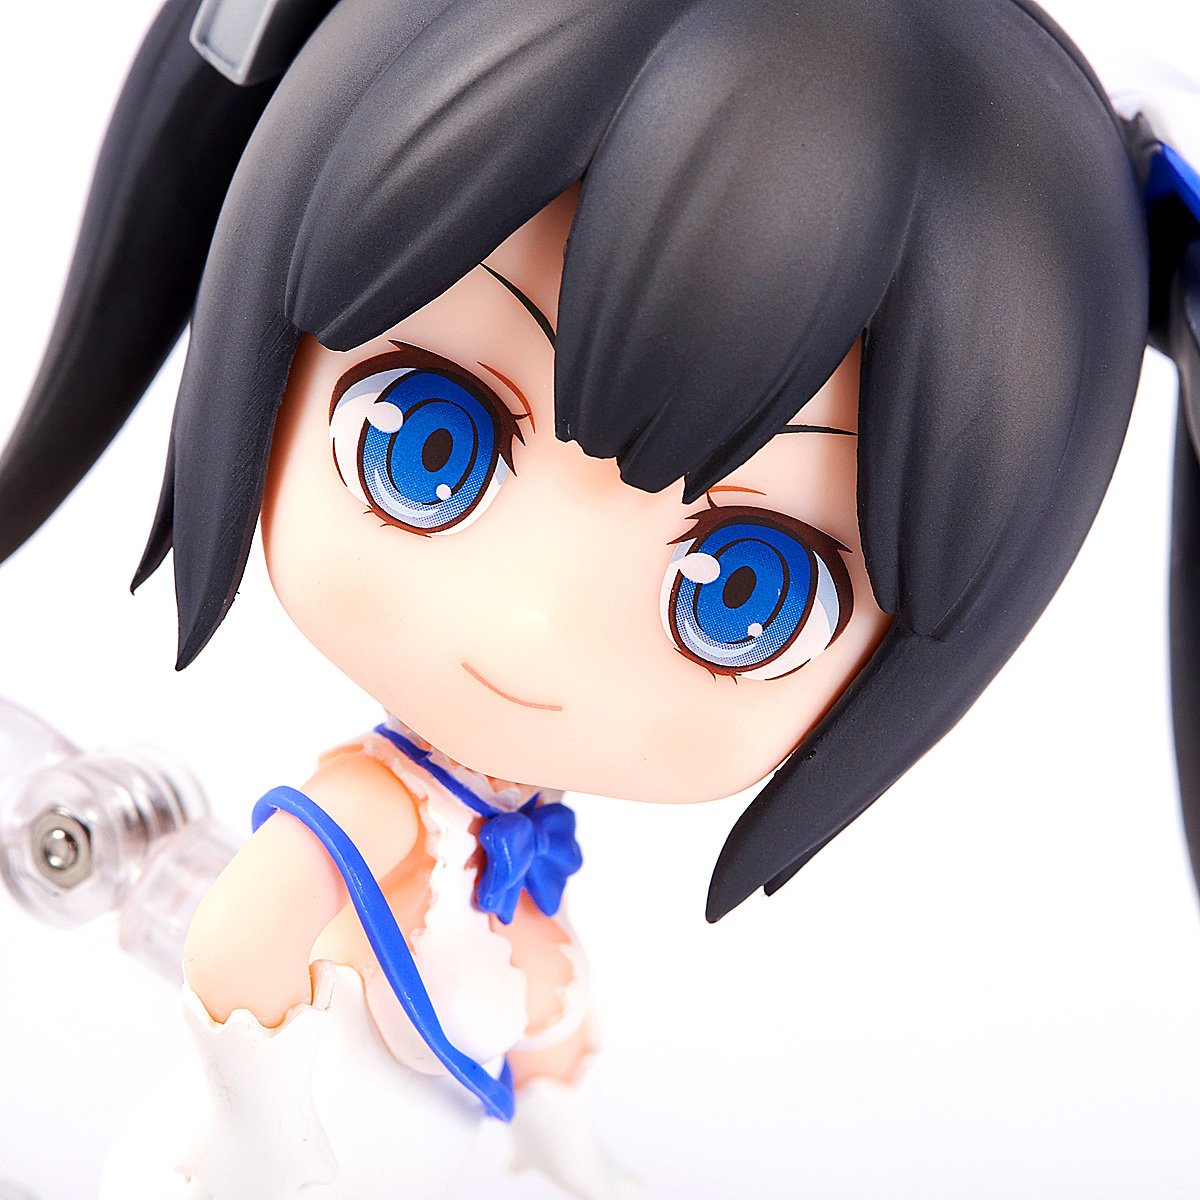 Nendoroid Hestia(Rerelease) Is It Wrong to Try to Pick Up Girls in a Dungeon? - Meccha Japan